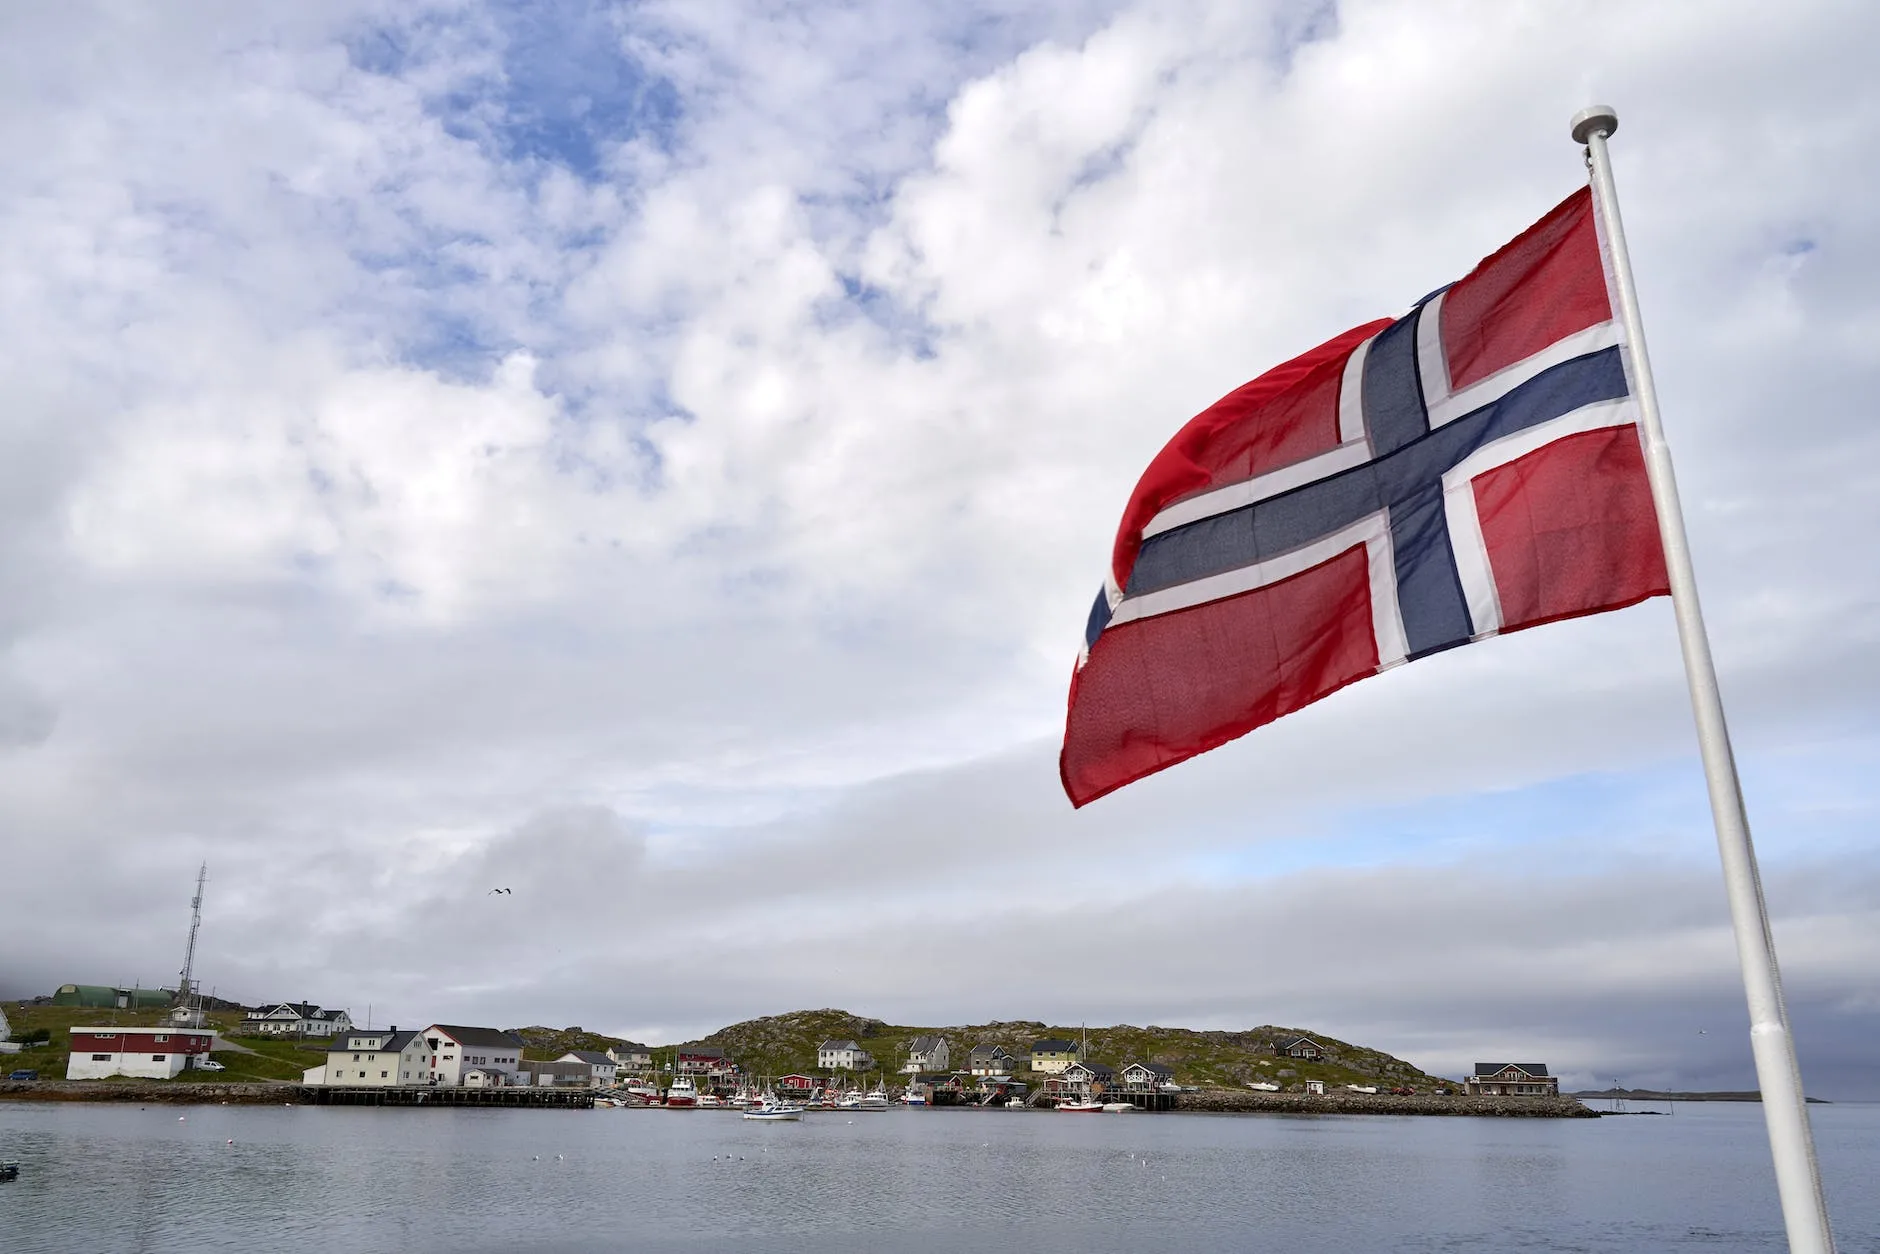 norway flag on pole near body of water